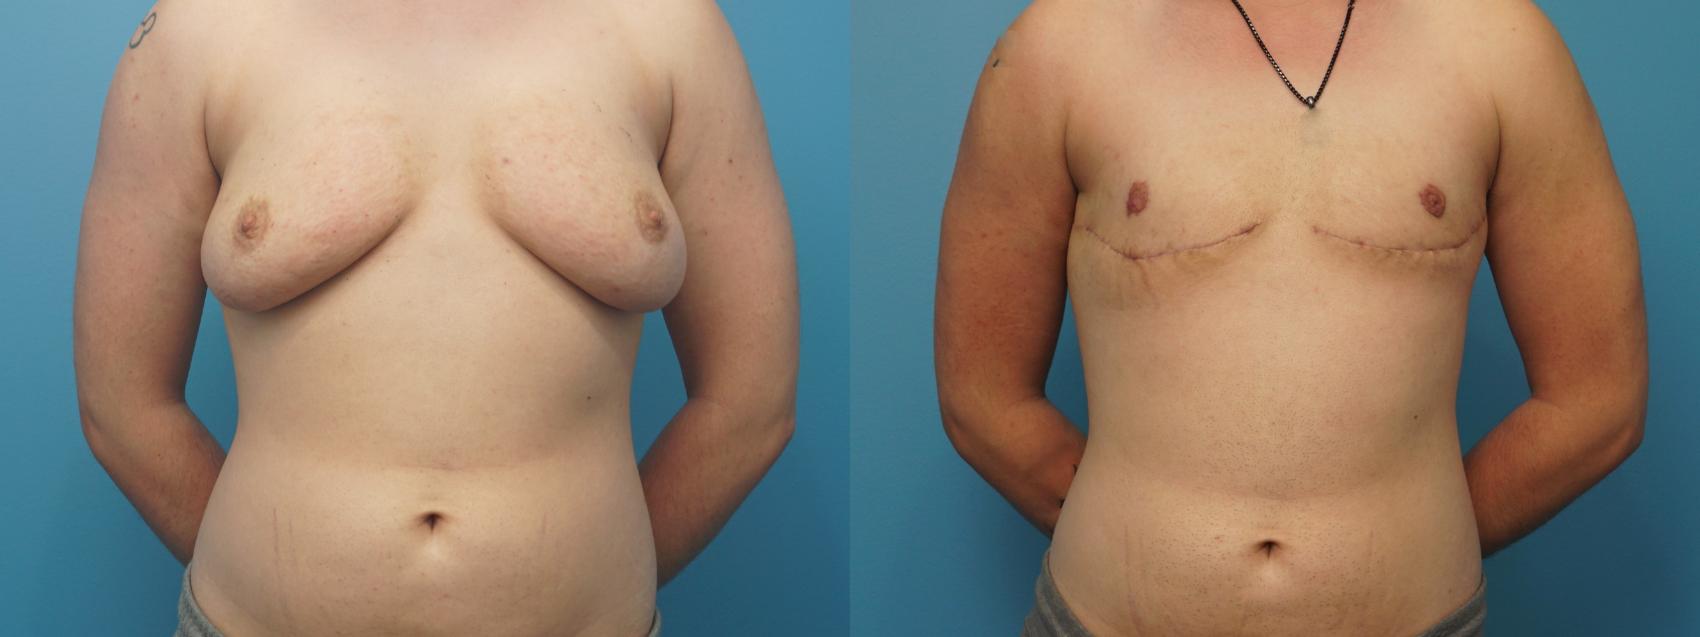 Before & After Gender Affirmation (Top Surgery) Case 374 Front View in North Shore, IL